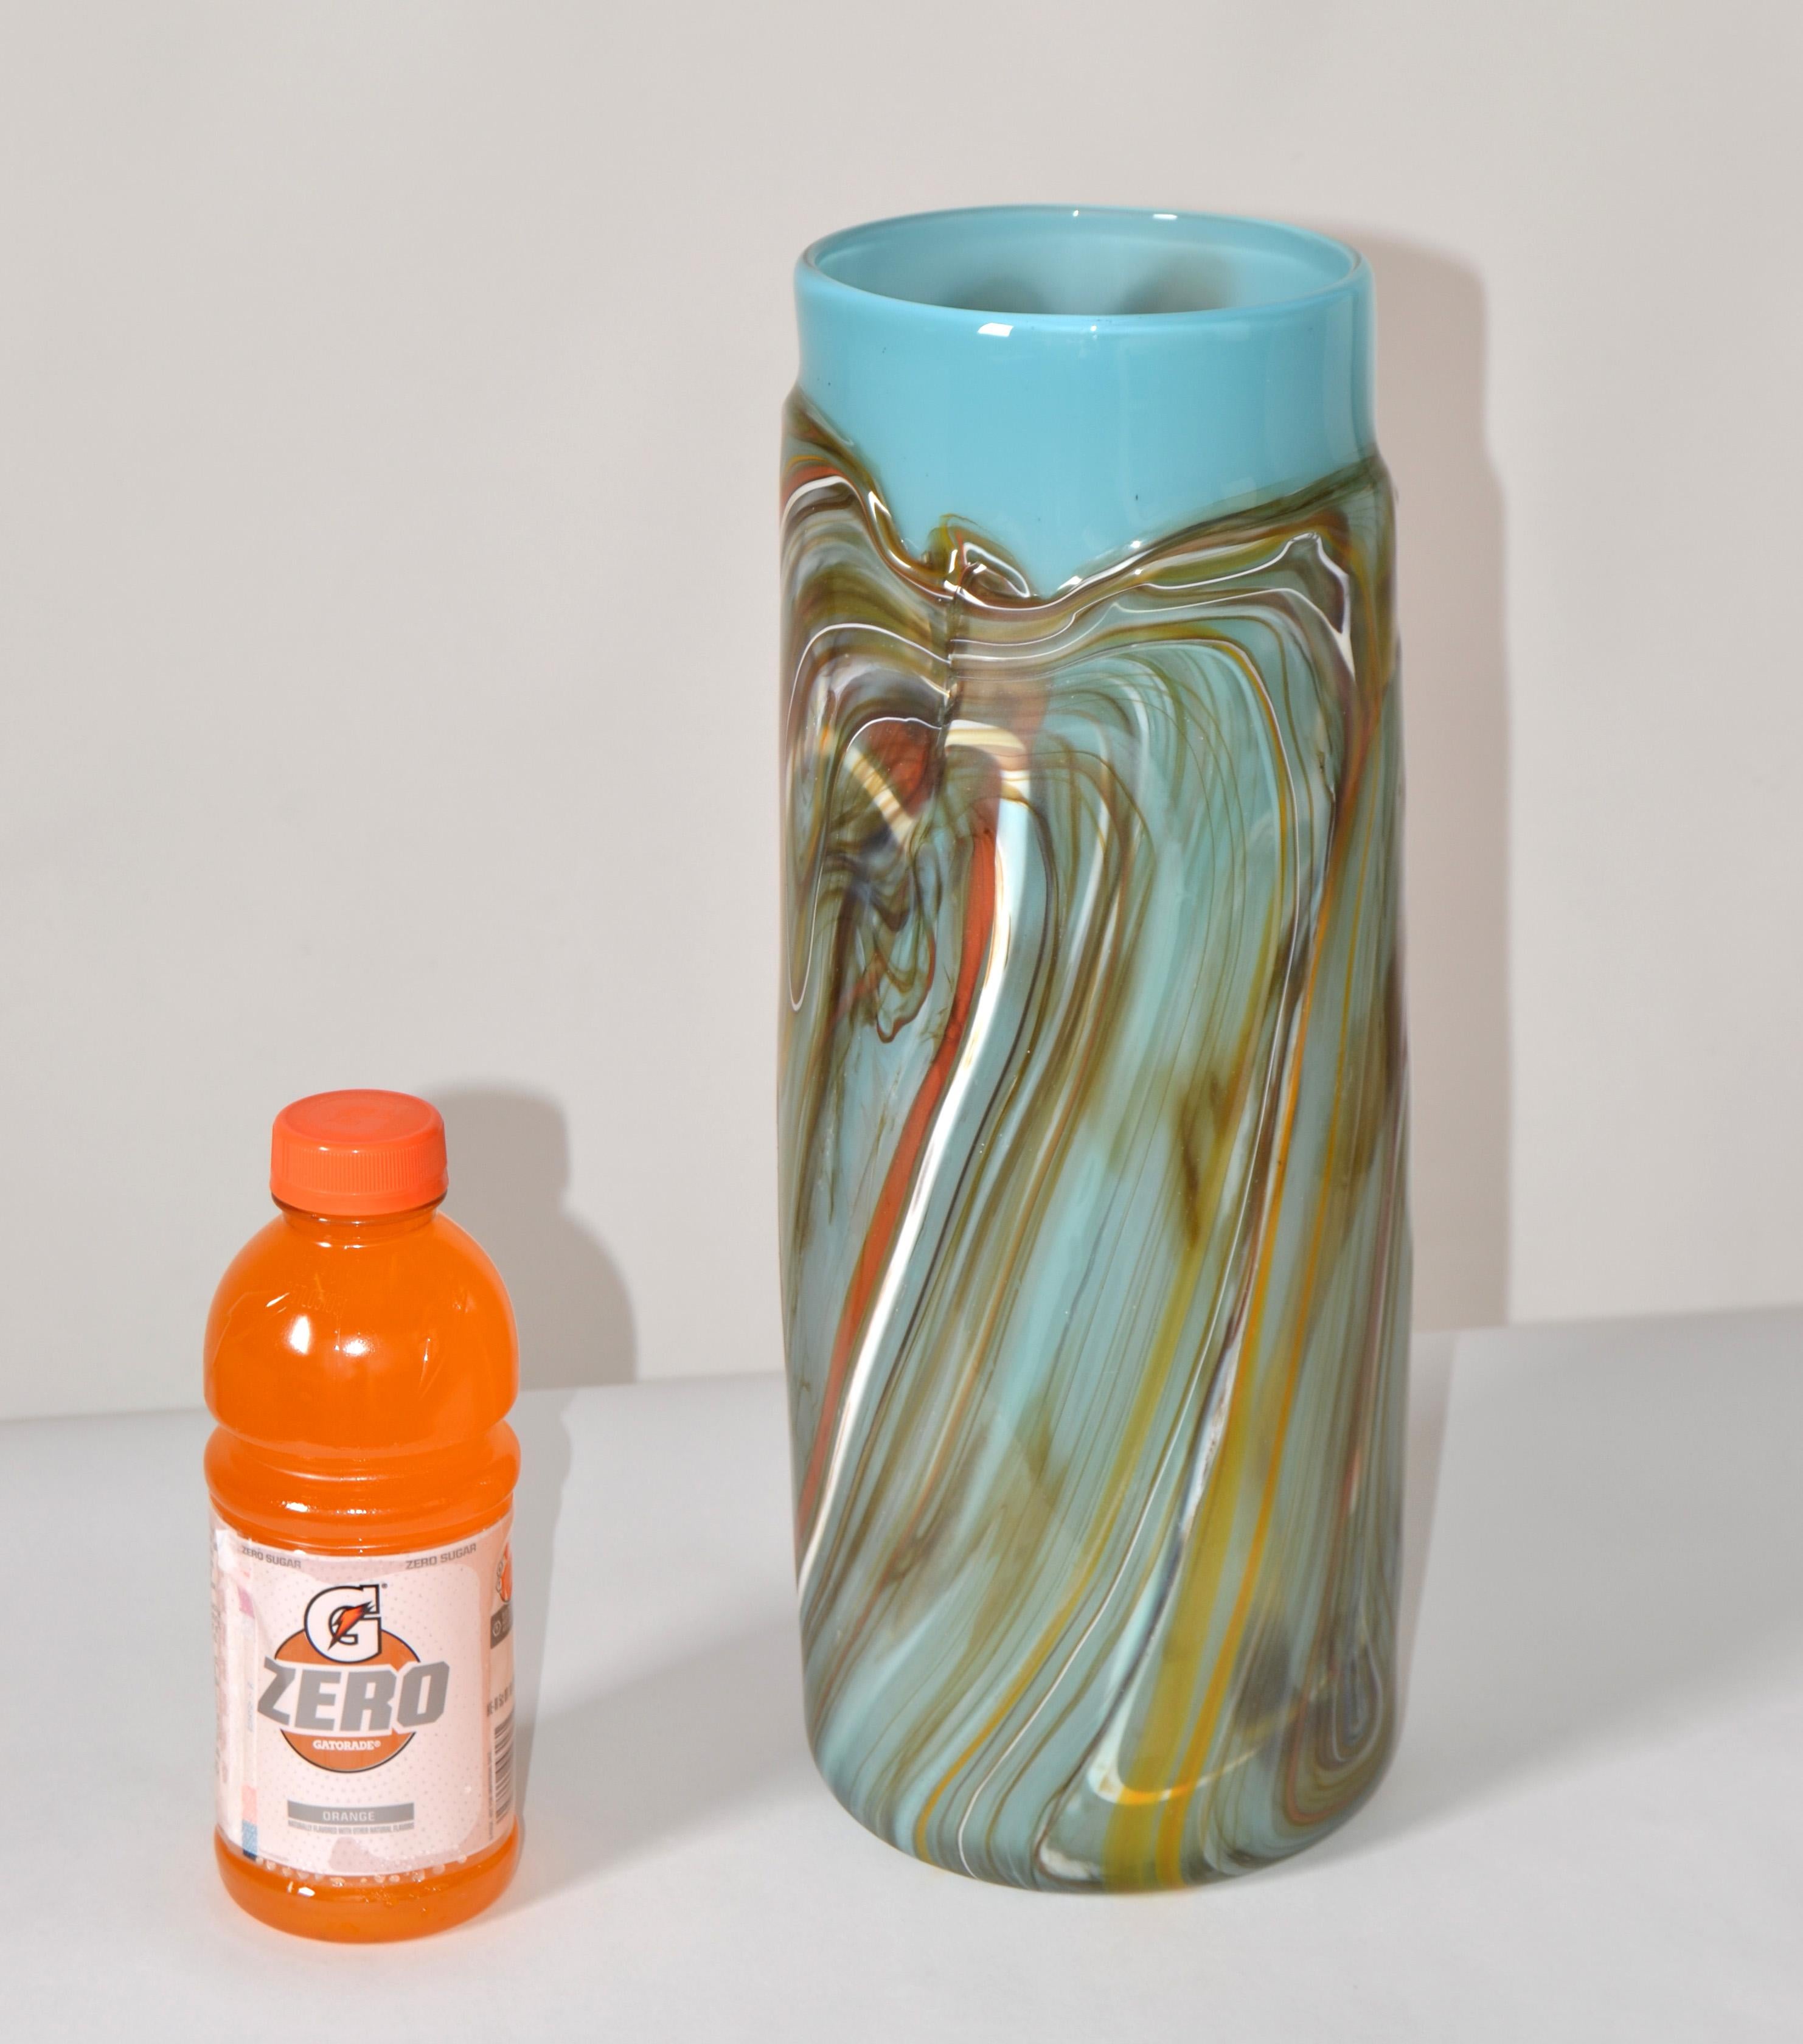 Vintage Studio Art Blown Glass Heavy Vase Vessel Turquoise and Hues Brown 1975 In Good Condition For Sale In Miami, FL